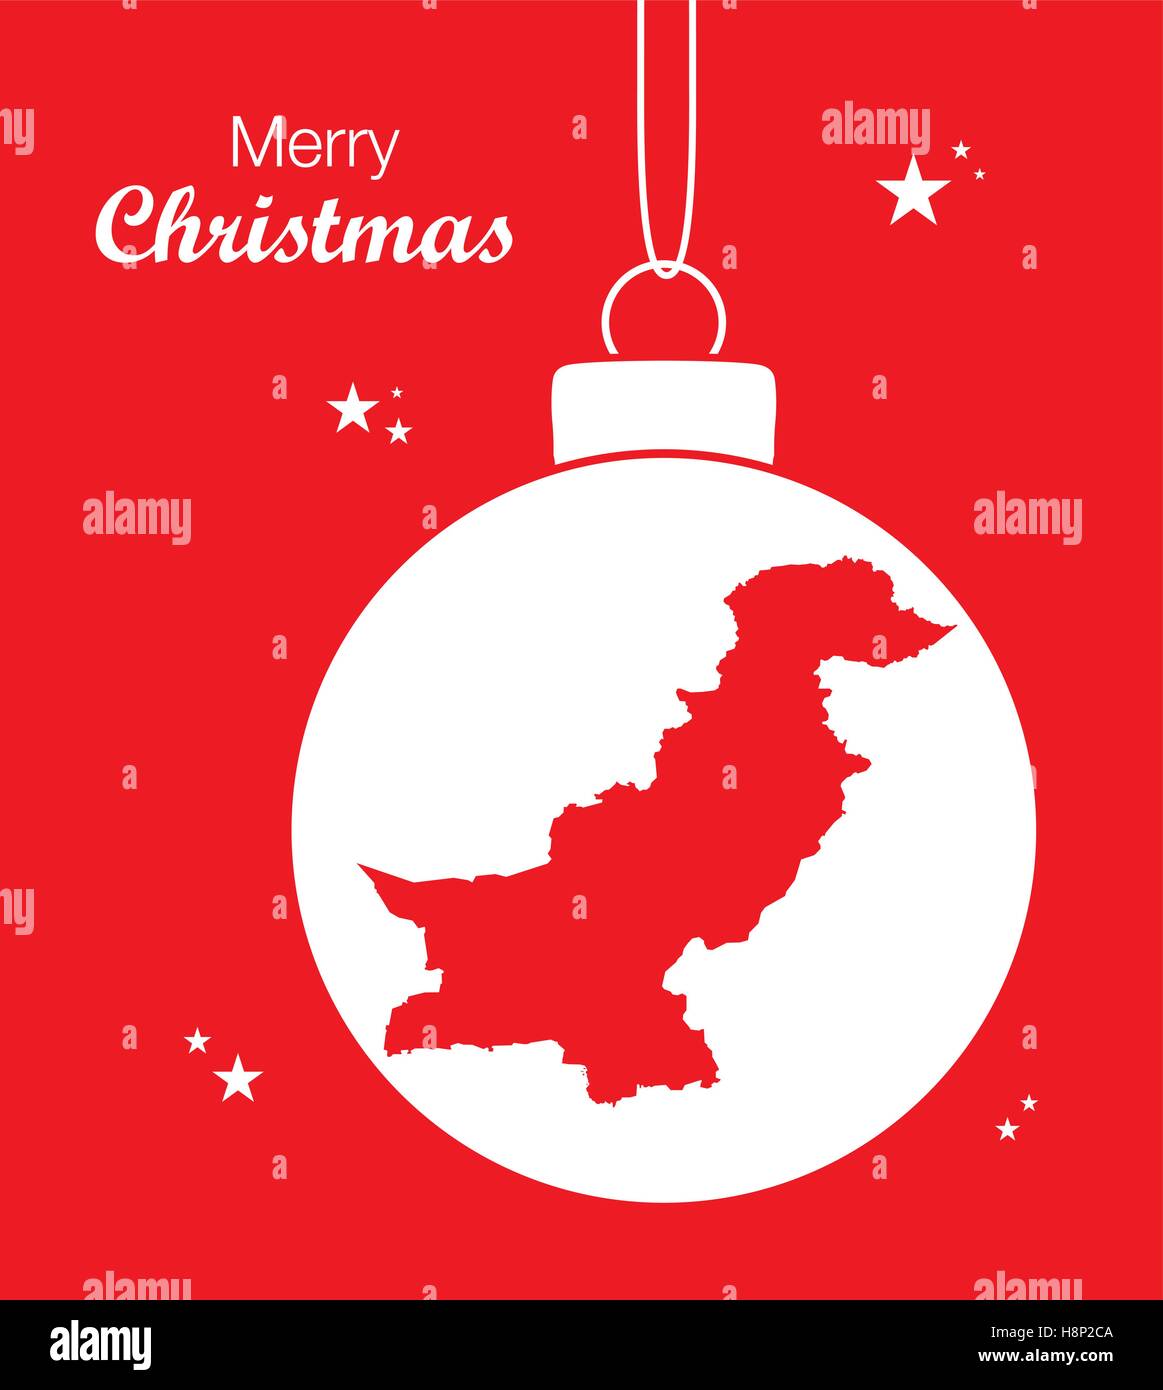 Merry Christmas illustration theme with map of Pakistan Stock Vector